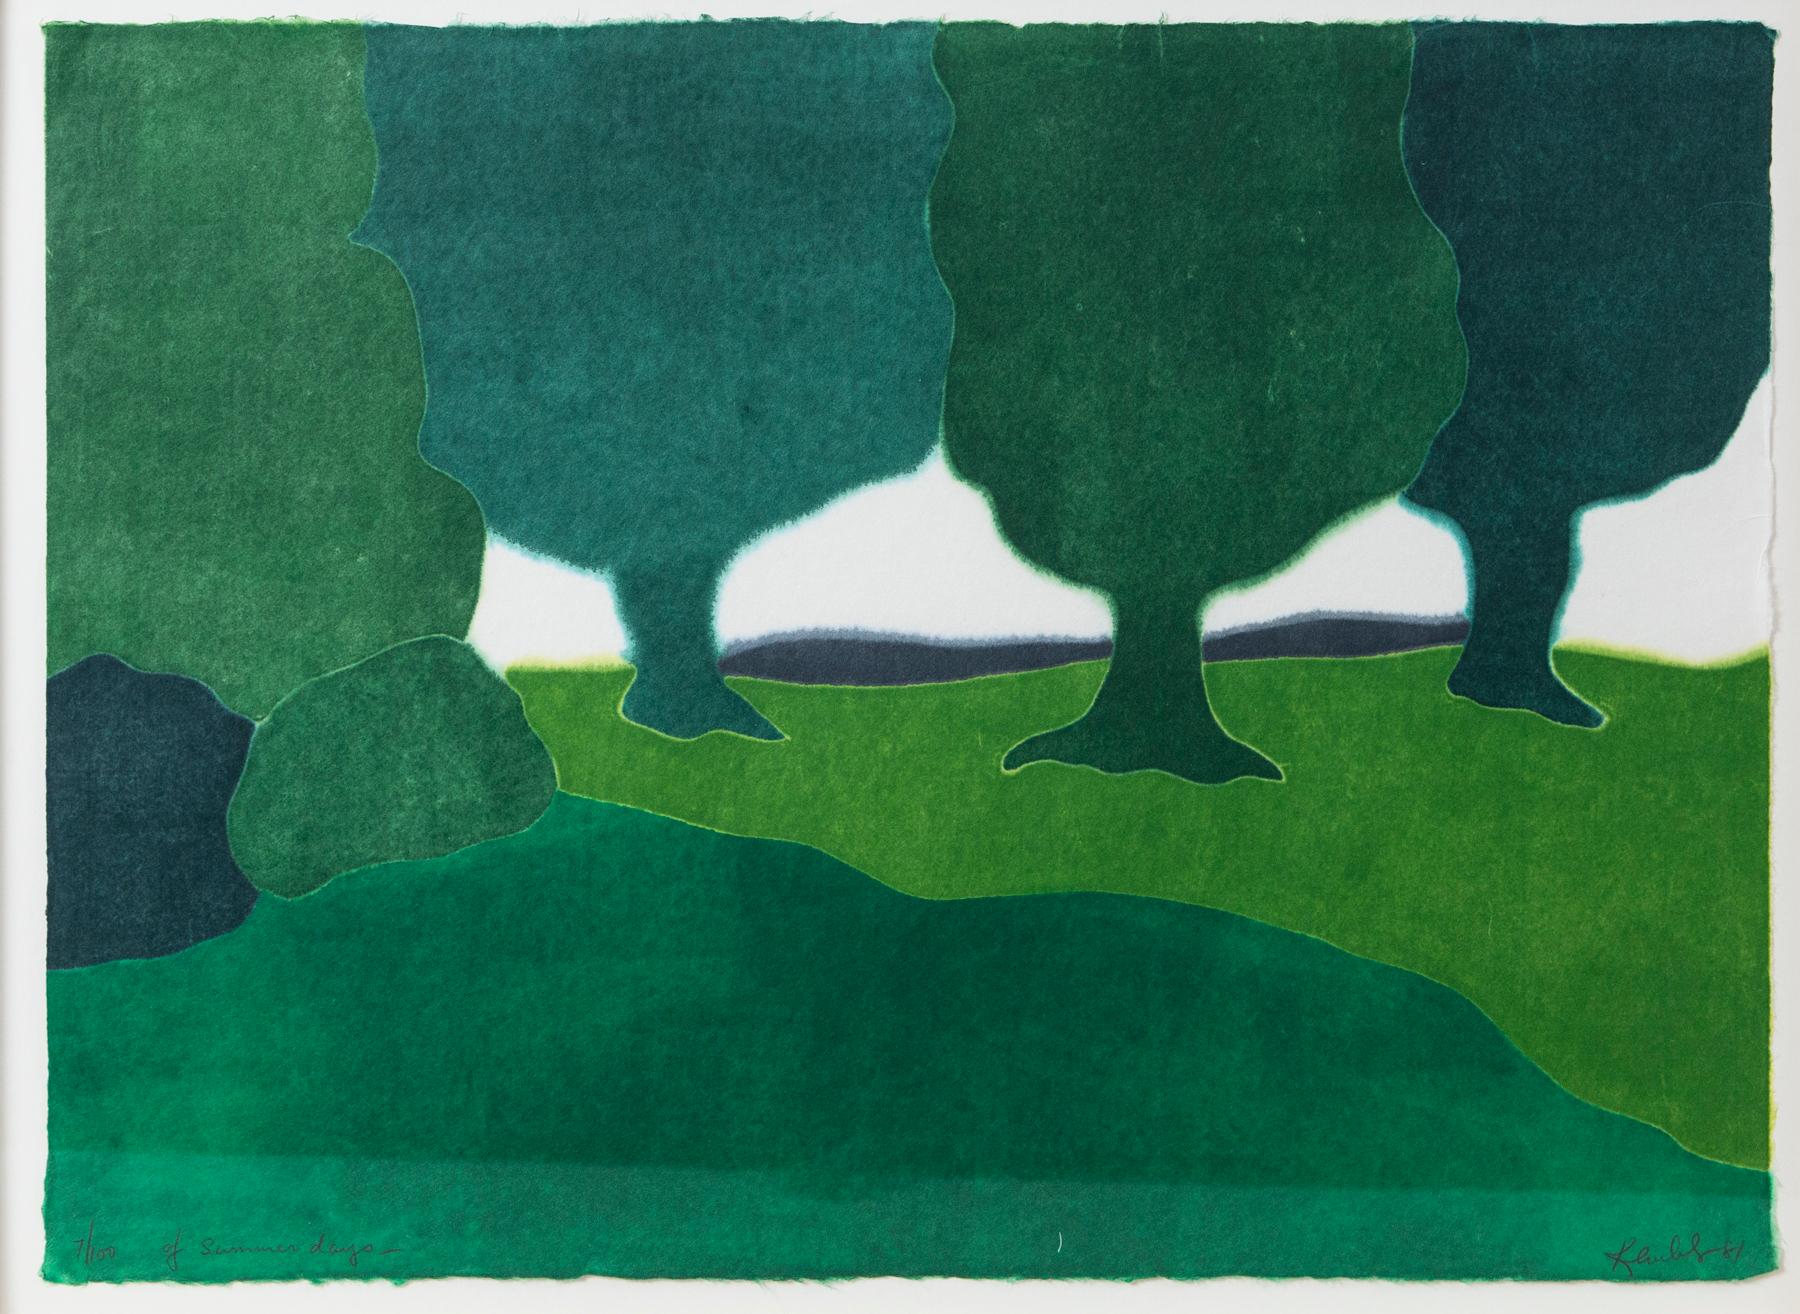 Richard Kemble, Of Summer Days, Editioned Woodblock Print, 1981. Signed, titled, dated and editioned 7/100 in pencil on print recto.